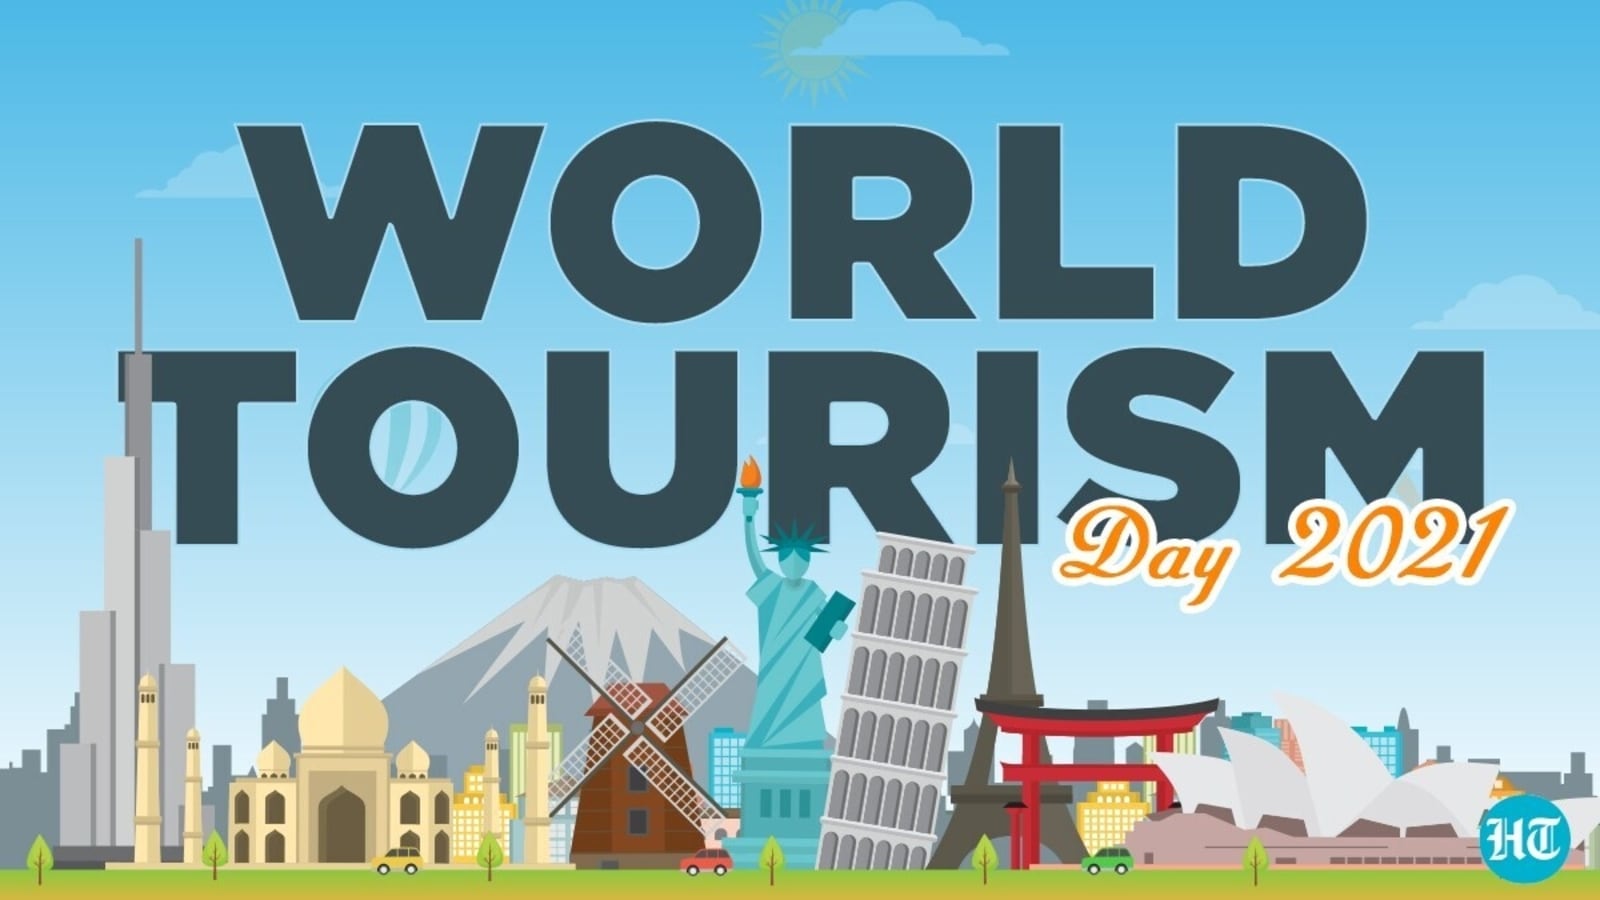 World Tourism Day 2021 Best images, quotes, messages to share on